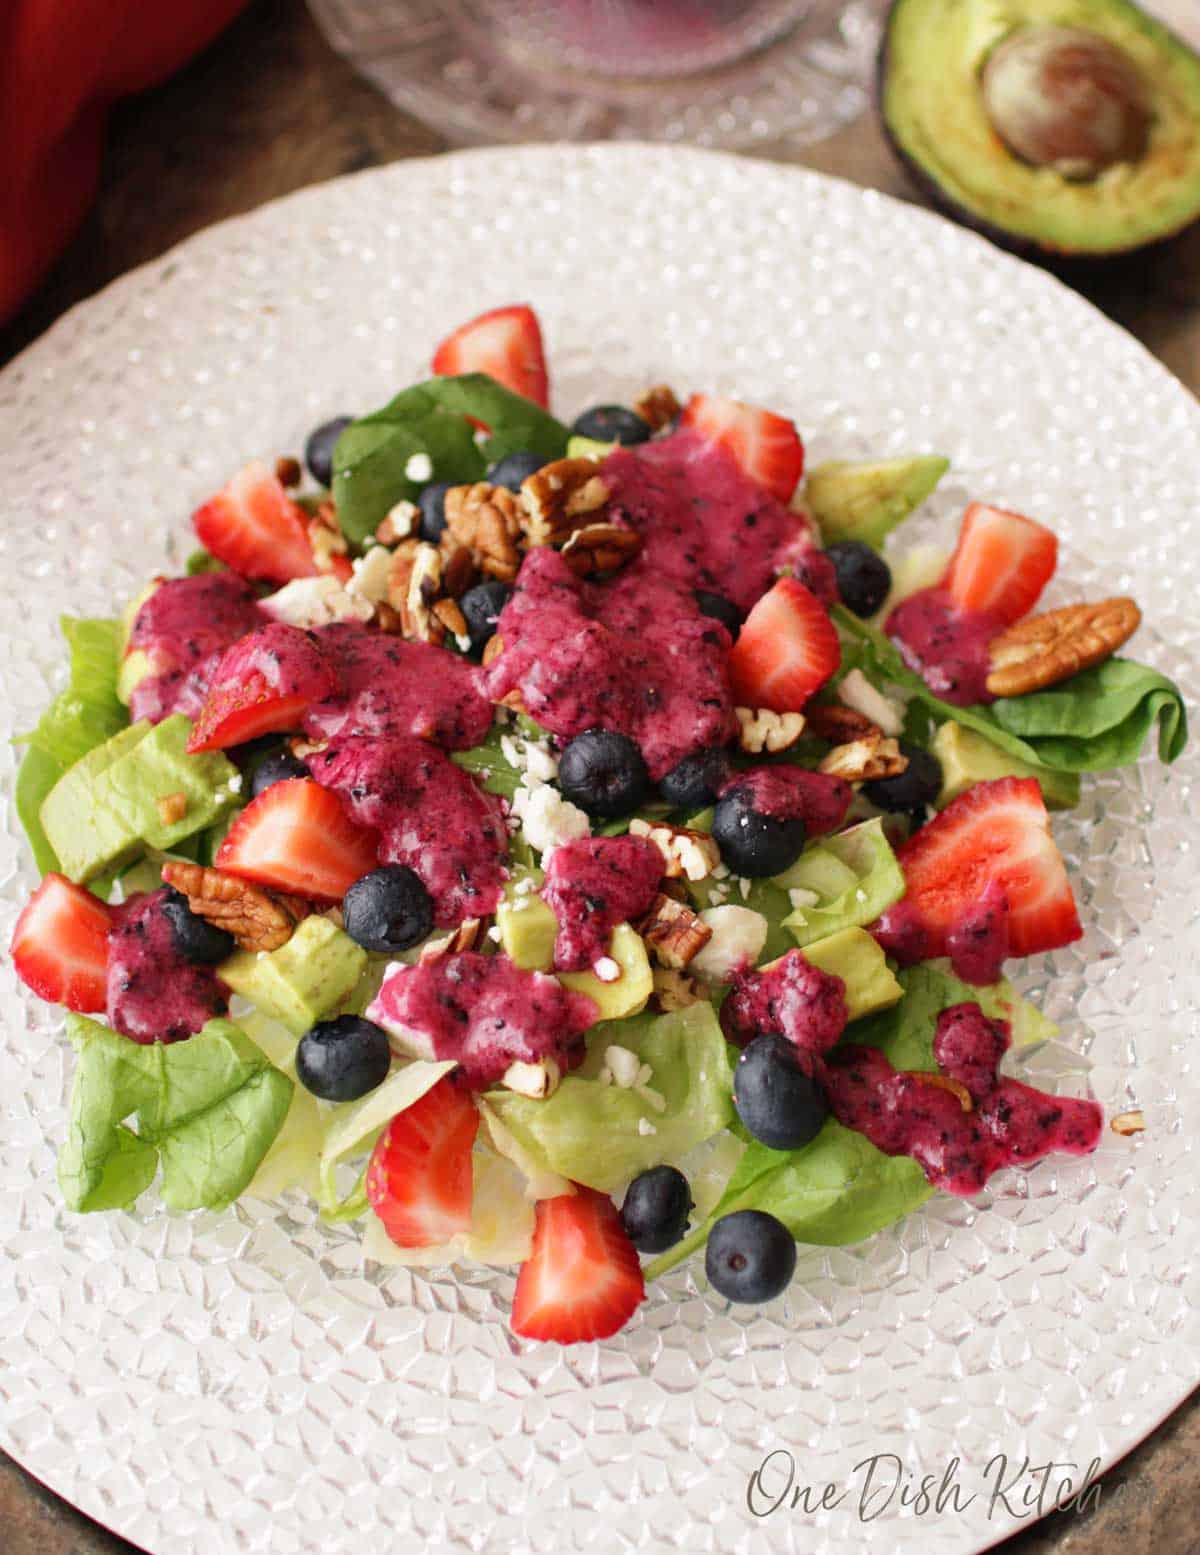 An overhead view of a salad consisting of avocados, strawberries, blueberries, pecans, feta cheese, and spinach with blueberry vinaigrette drizzled over the top